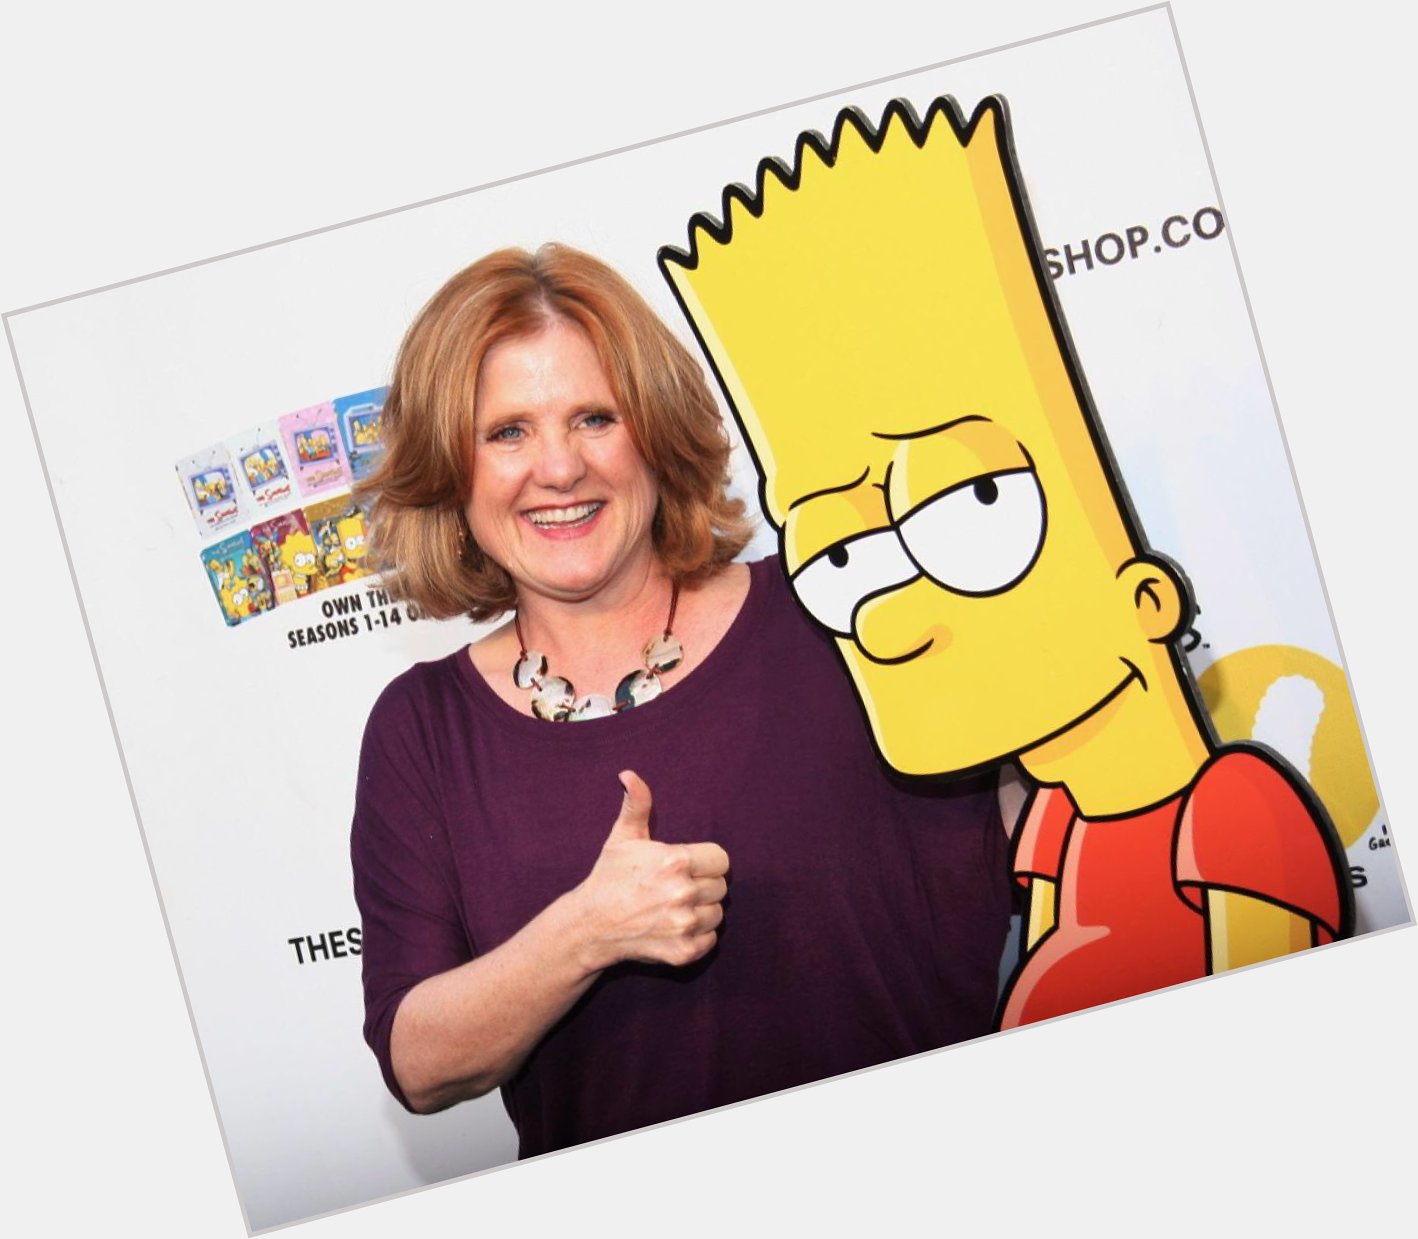 Today in Comics History: Happy 60th birthday to the voice of Bart Simpson, Nancy Cartwright, born on Oct 25, 1957. 